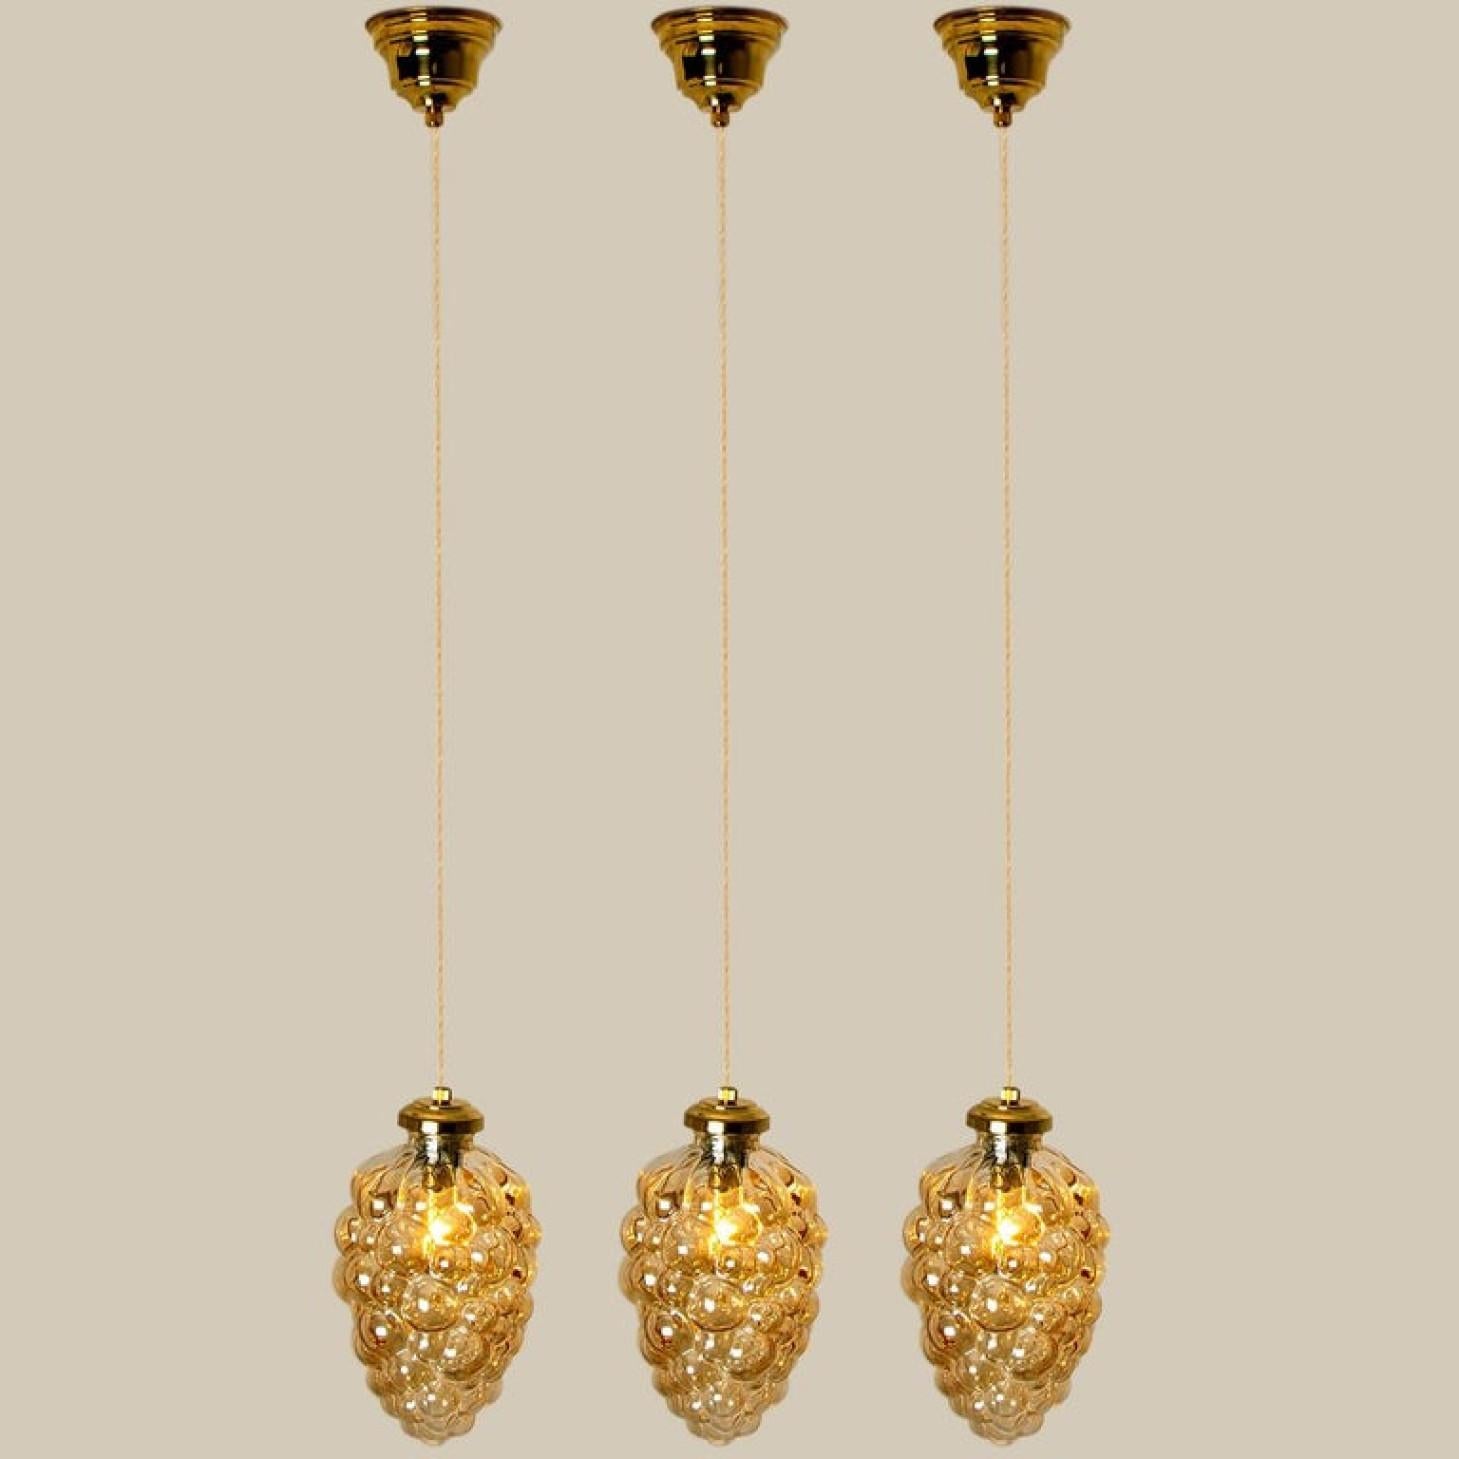 A  set of amazing hand blown pendant light fixtures by Helana Tynell. Beautiful craftsmanship from the 20th century.
Illuminates beautifully

This lamps can be used for a room, a stunning staircase, or to decorate a corner of your home. The